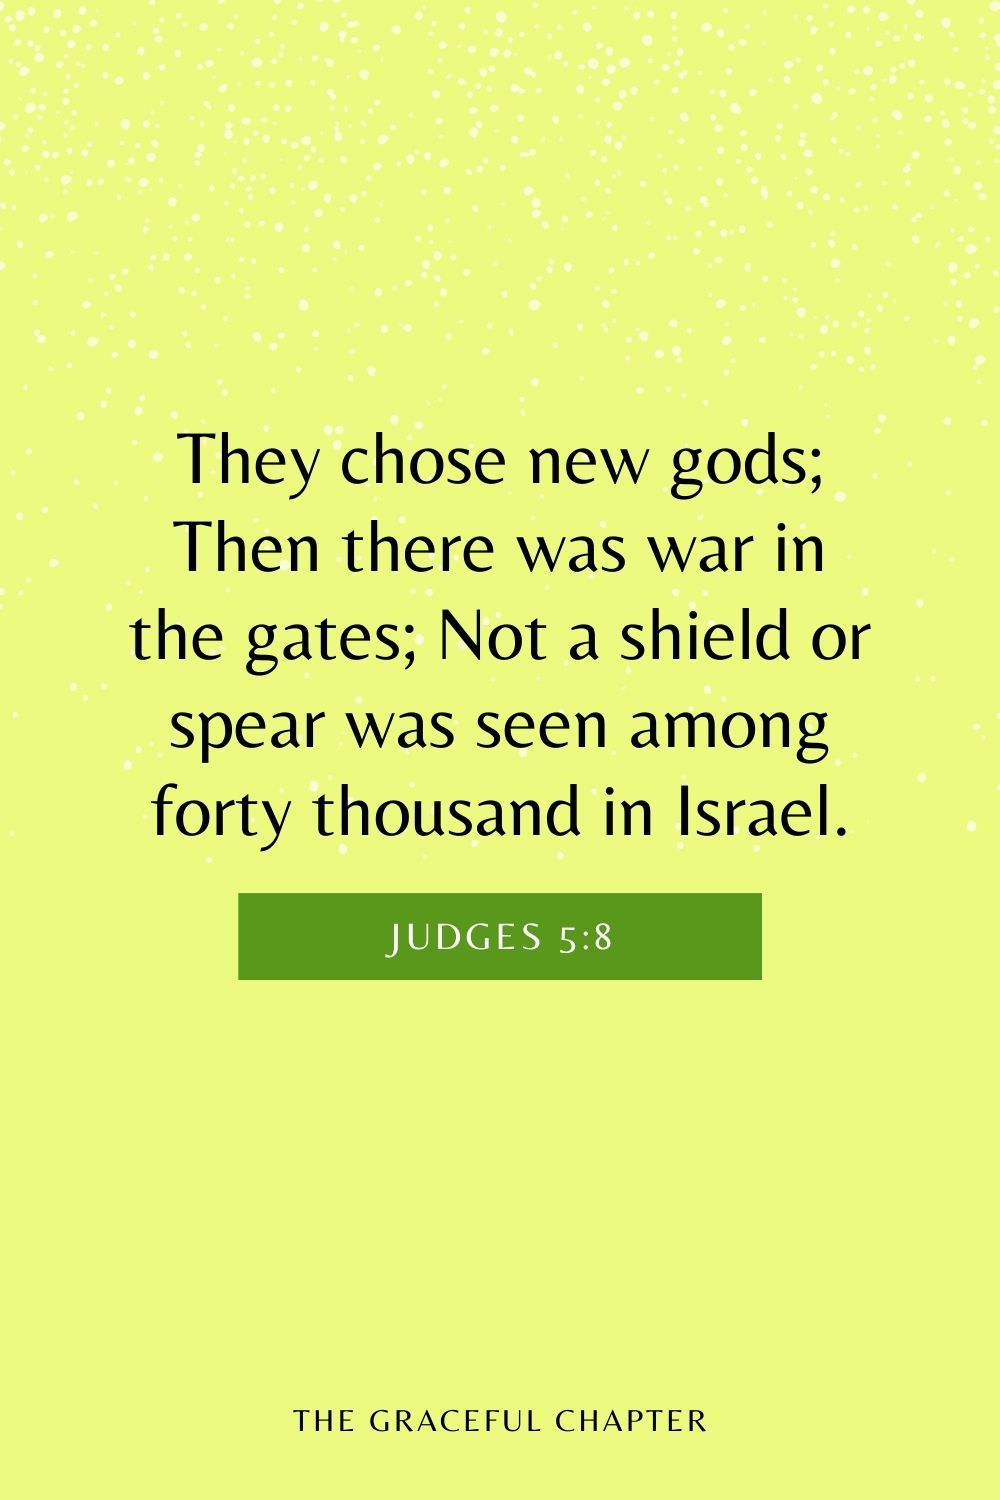 They chose new gods; Then there was war in the gates; Not a shield or spear was seen among forty thousand in Israel. Judges 5:8